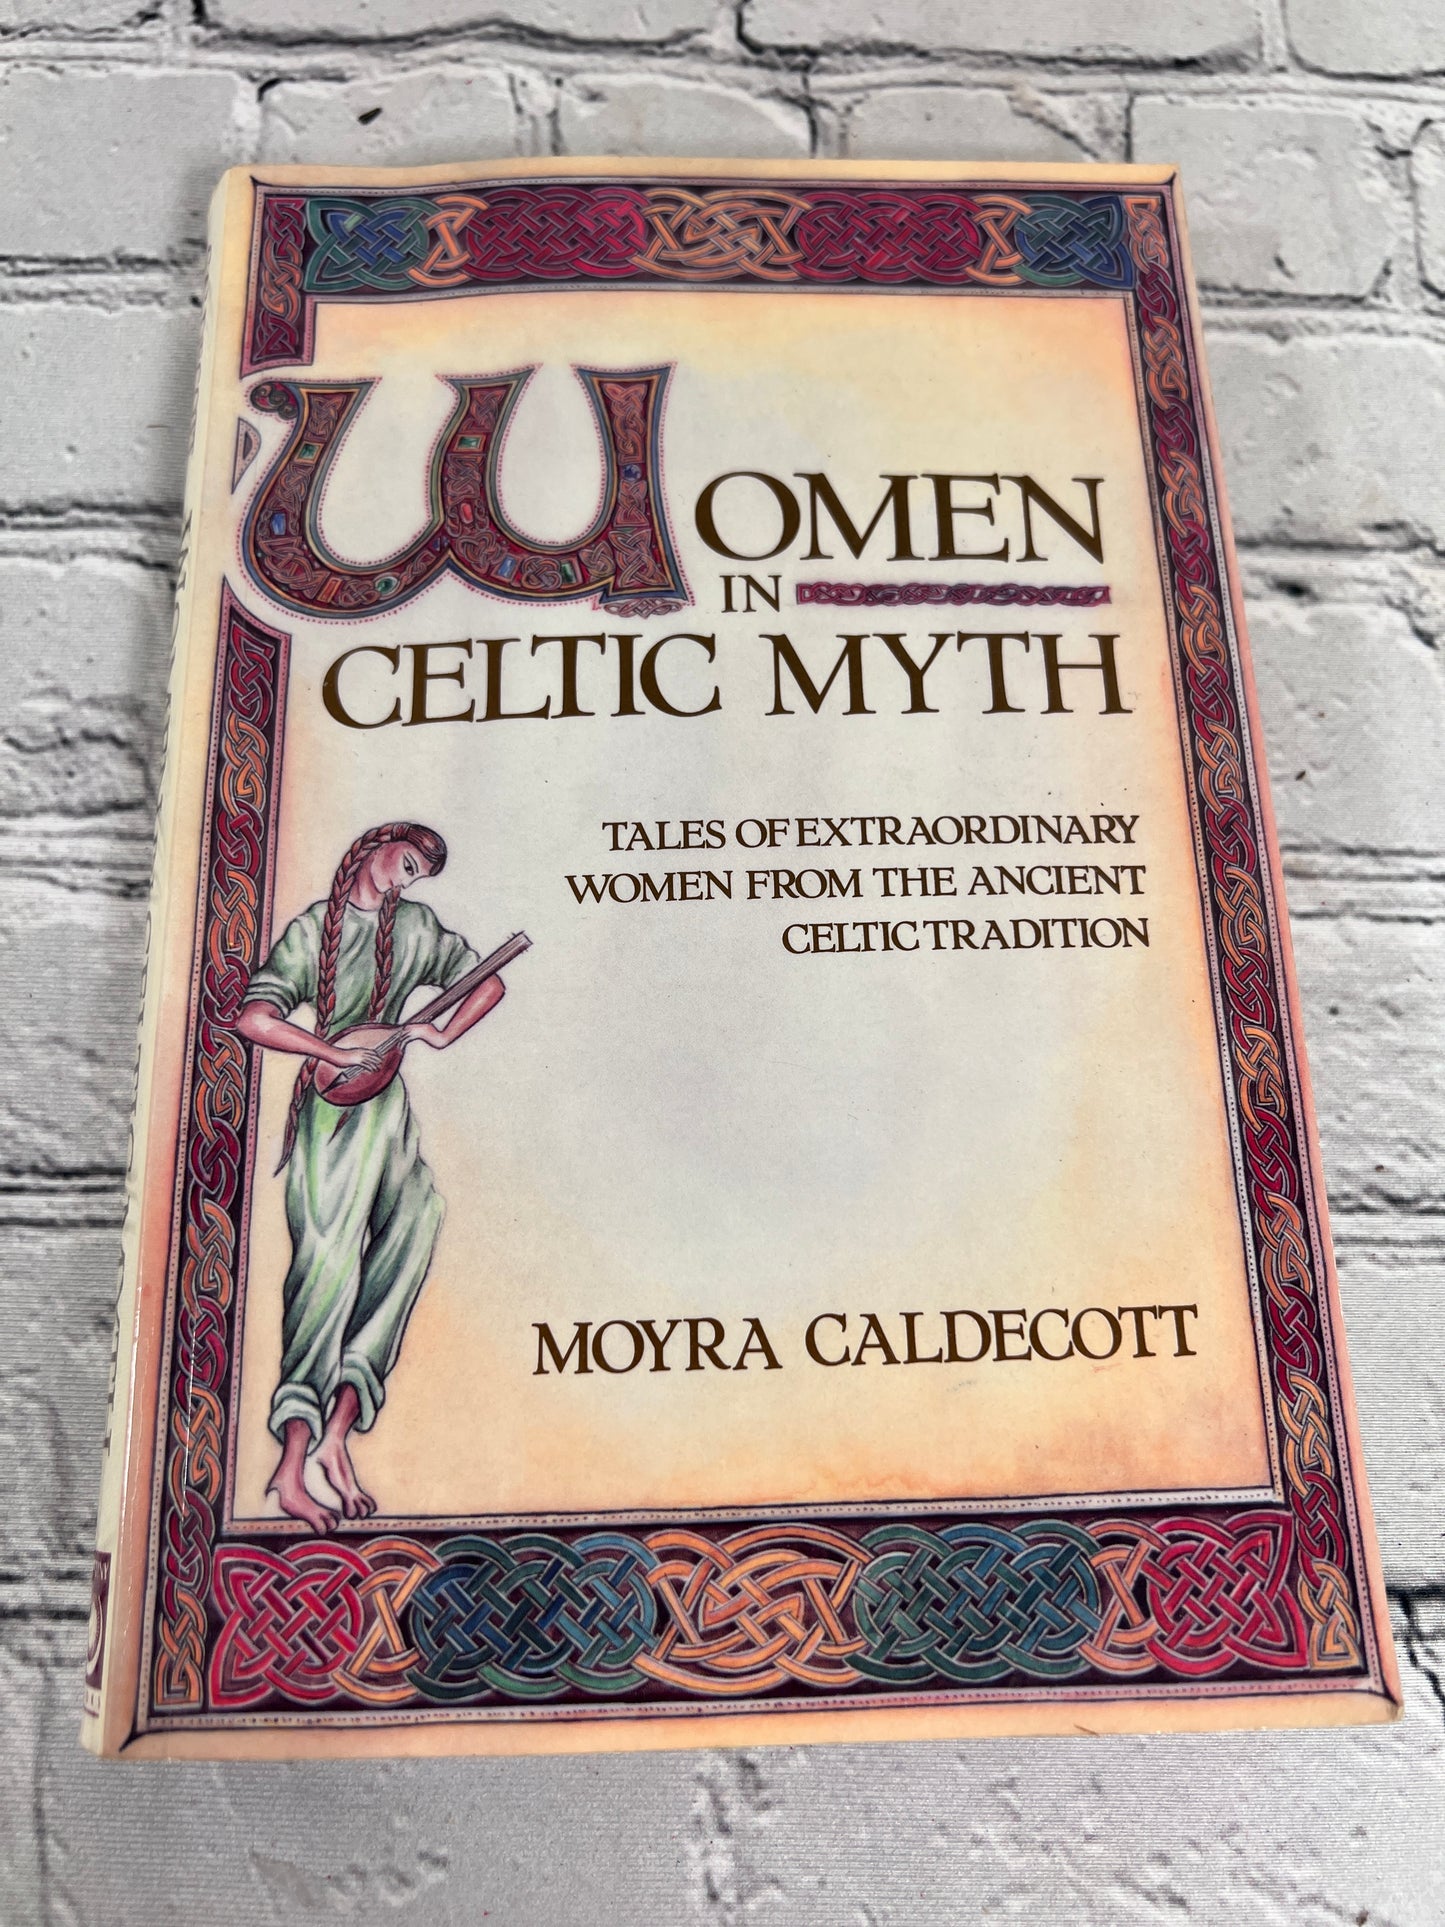 Women in Celtic Myth Extraordinary Women from Ancient Celtic Tradition by Moyra Caldecott